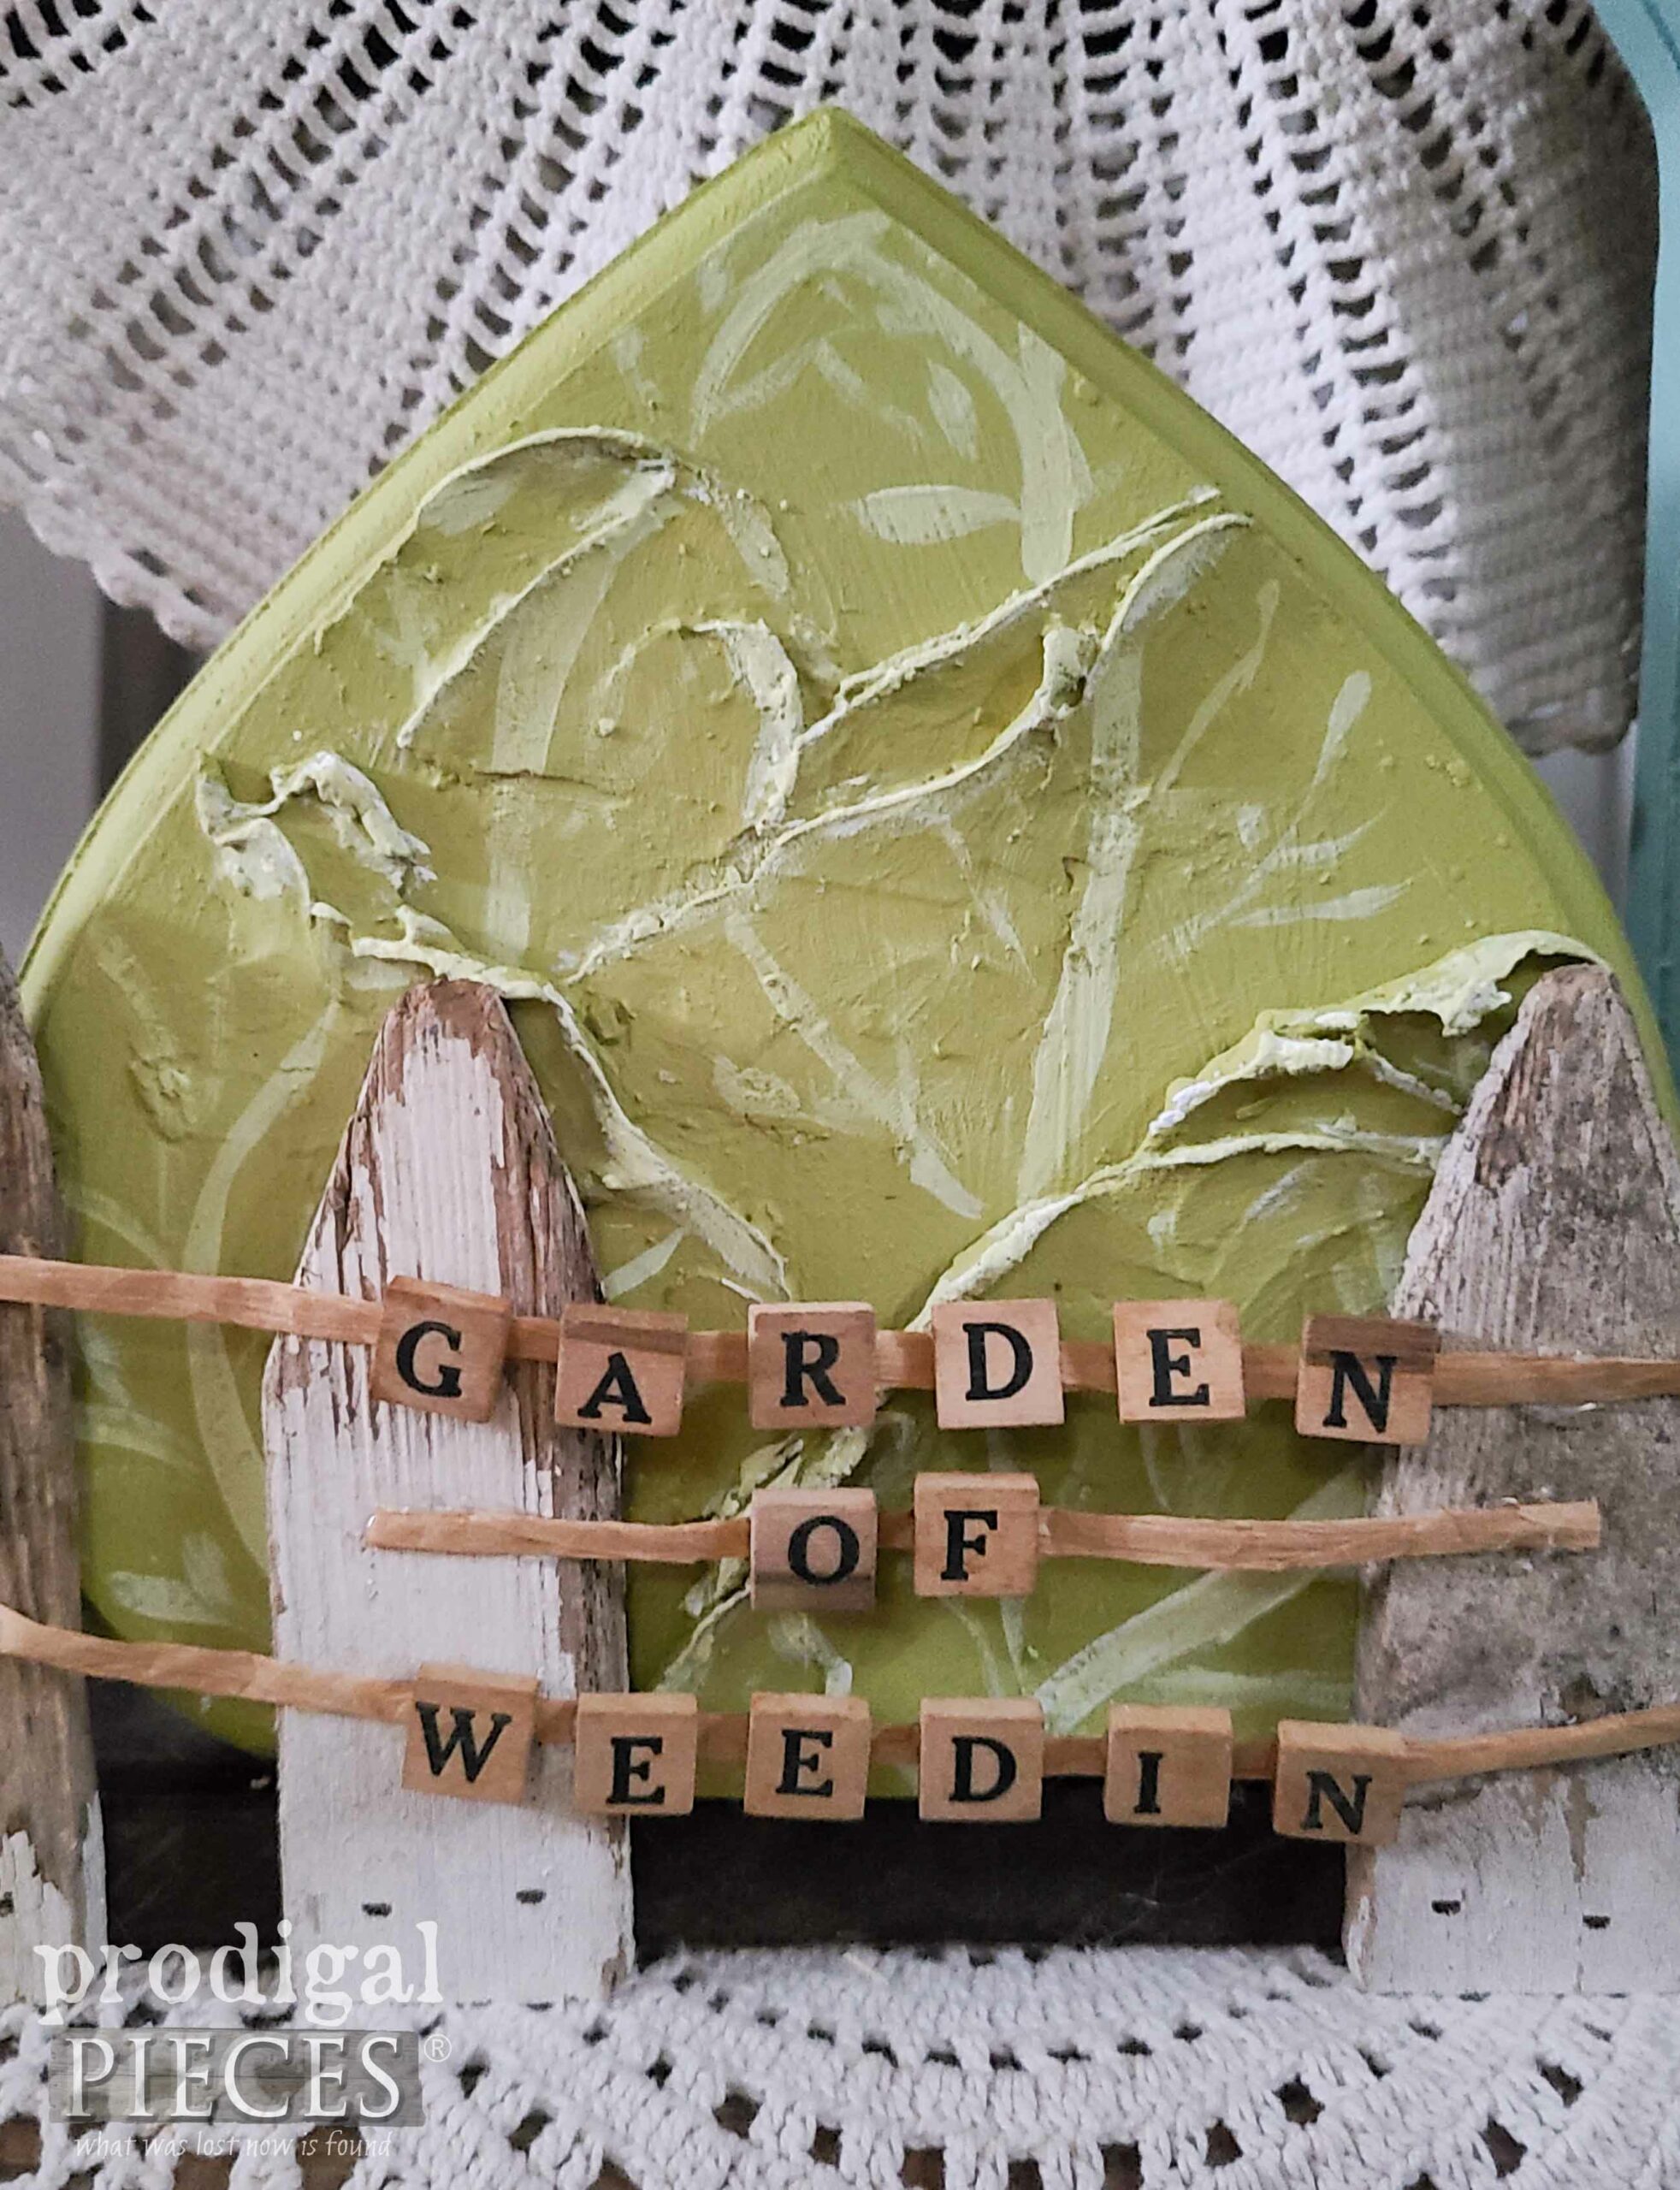 Crafty Cabbage Garden from Vintage Wall Art by Larissa of Prodigal Pieces | prodigalpieces.com #prodigalpieces #upcycled #diy #art